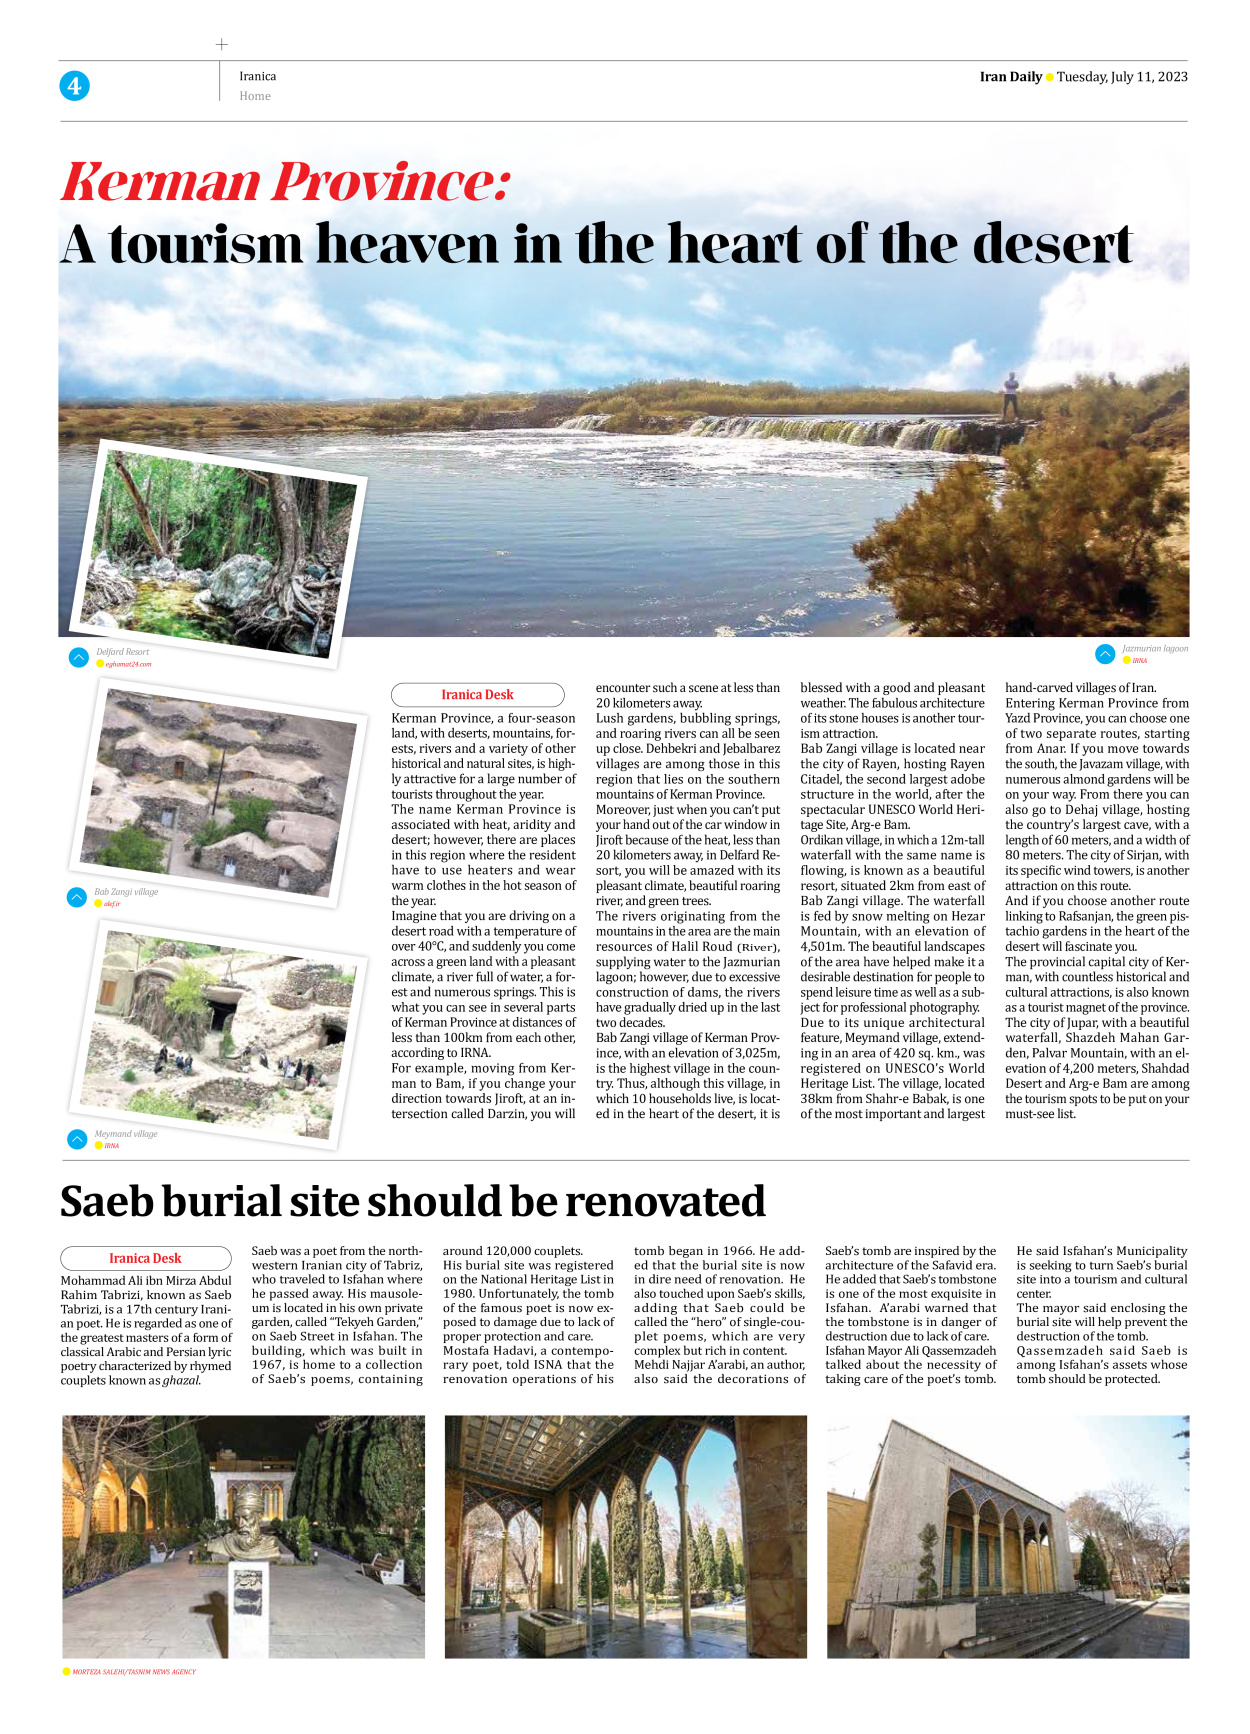 Iran Daily - Number Seven Thousand Three Hundred and Thirty Six - 11 July 2023 - Page 4